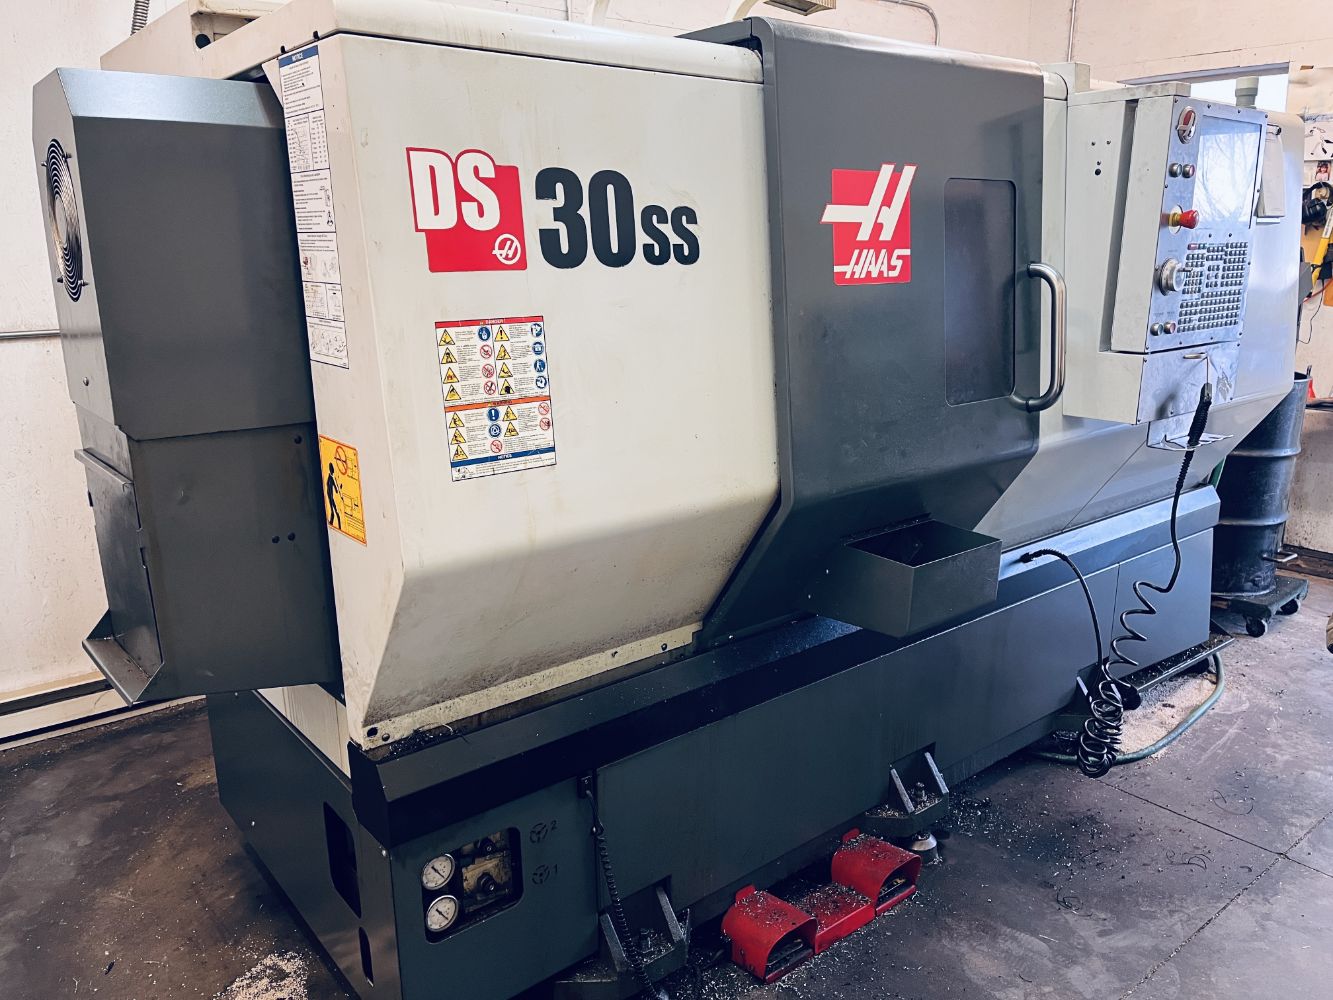 2013 THERMAL DYNAMICS DMC-3000 PLASMA CUTTER, 2012 HAAS DS-30SS LATHE, LINCOLN ELECTRIC ROBOTIC WELDING CELL, UNI-HYDRO 80 TON IRON WORKER